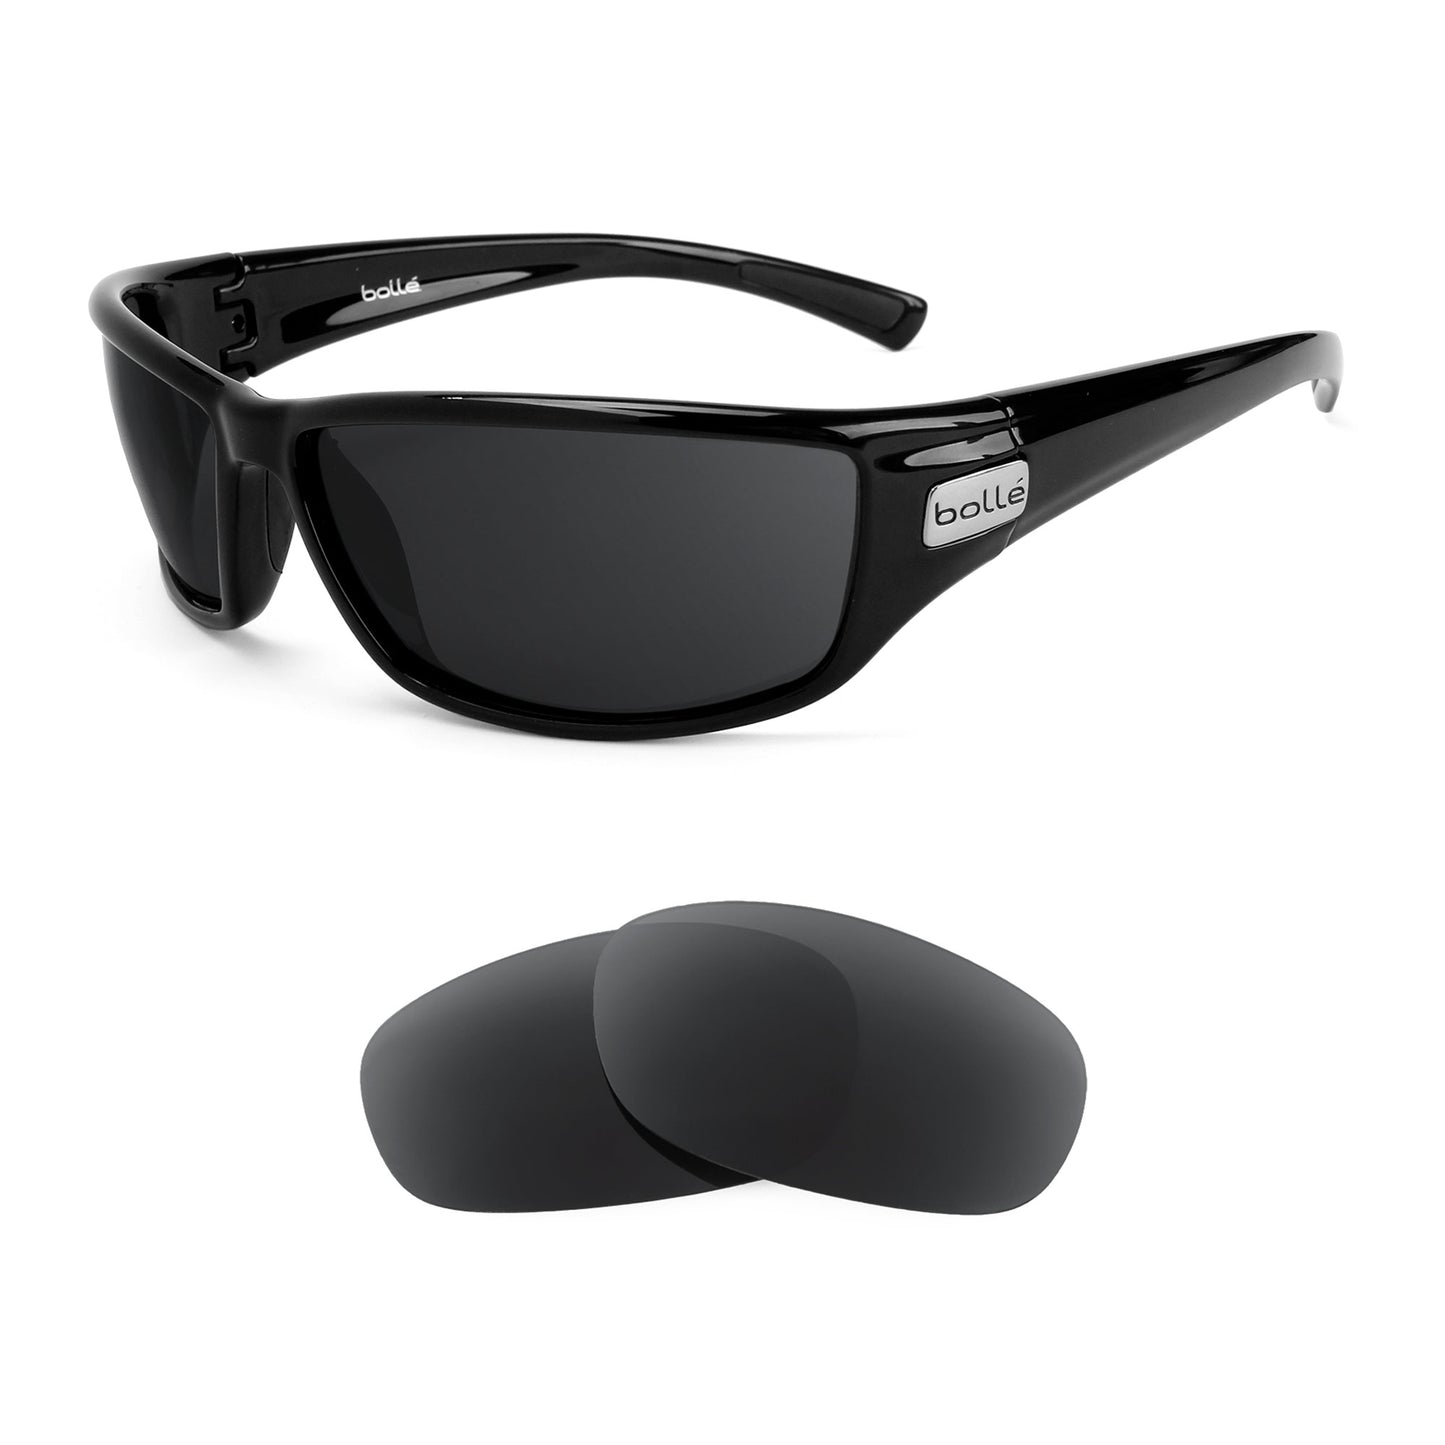 Bolle Python sunglasses with replacement lenses